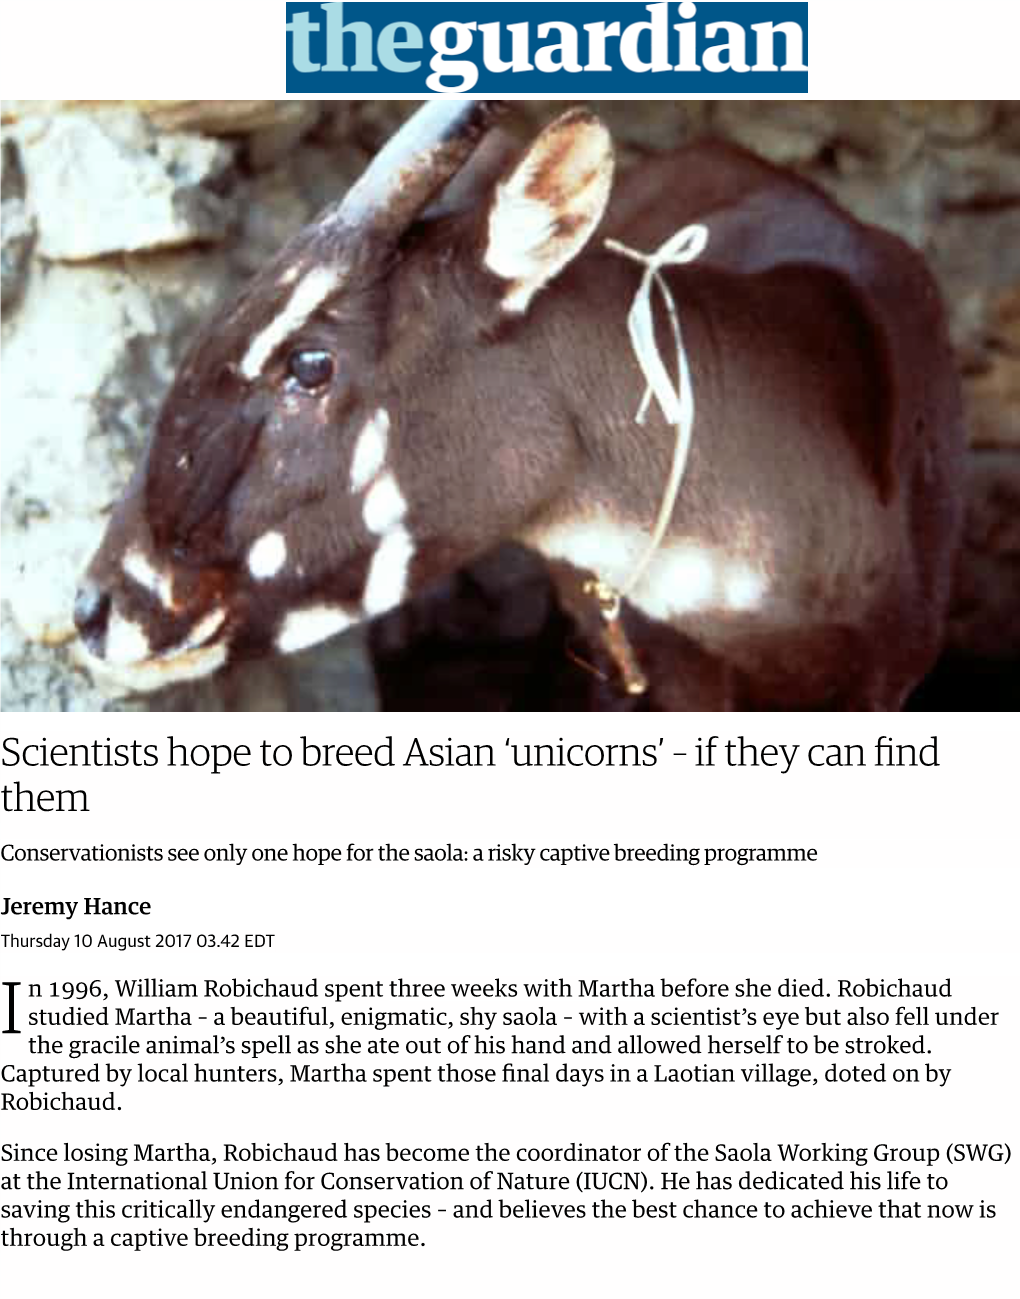 Scientists Hope to Breed Asian 'Unicorns' – If They Can Find Them